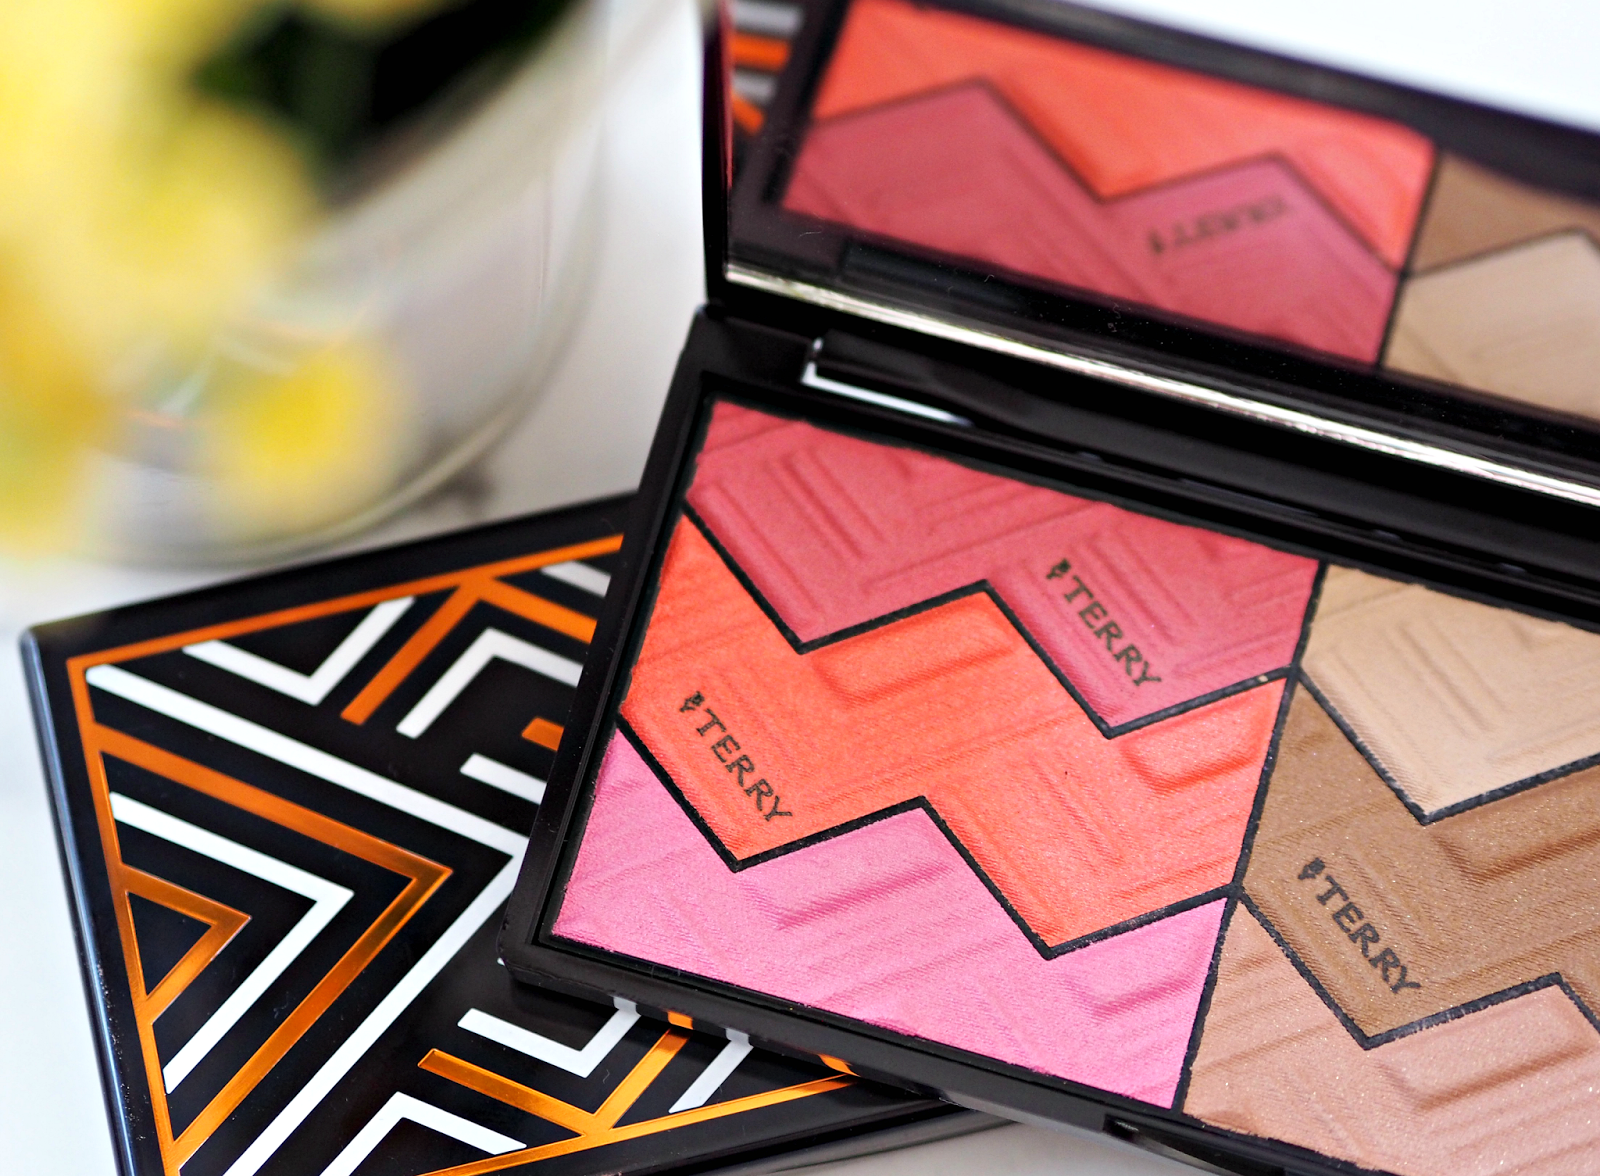 Another Level Of Lustworthy: By Terry's ZigZag Sun Designer Palettes